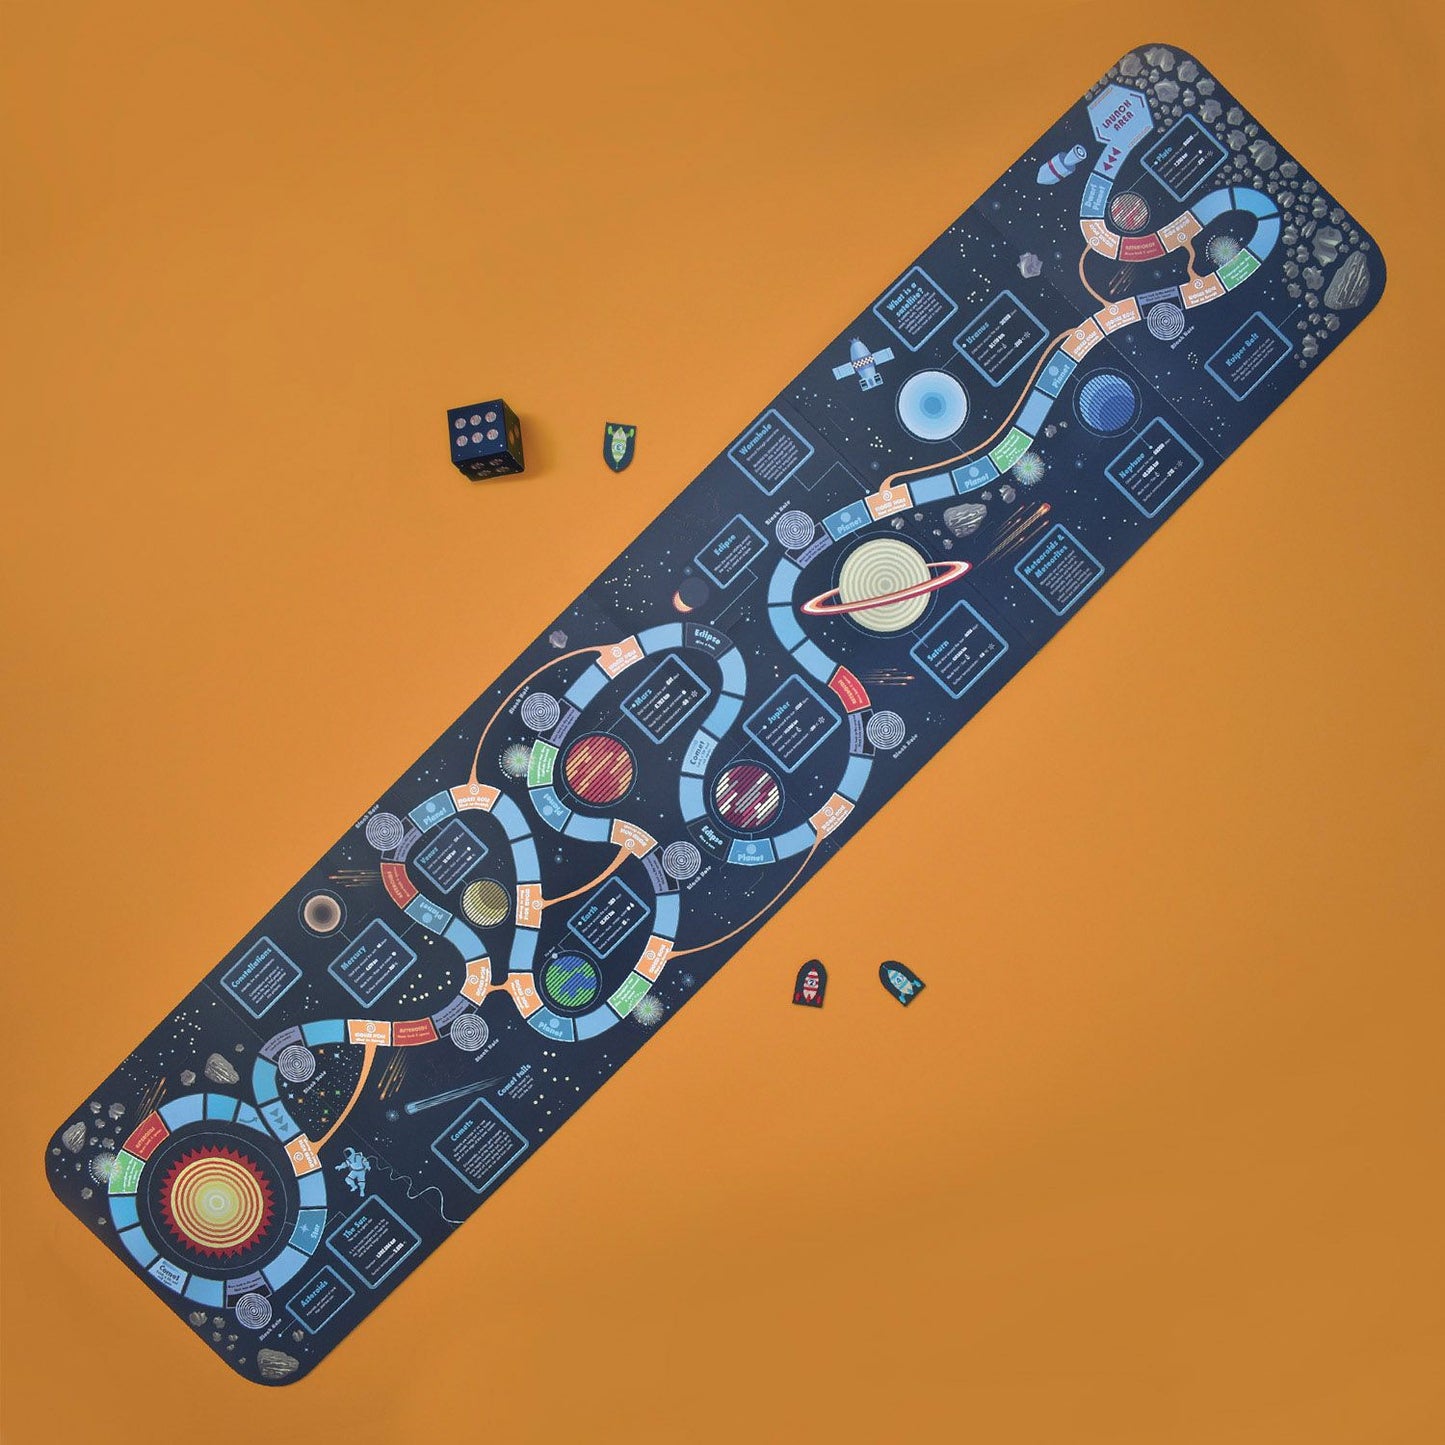 Clockwork Soldier - Create Your Own Solar System Activity Set for Kids